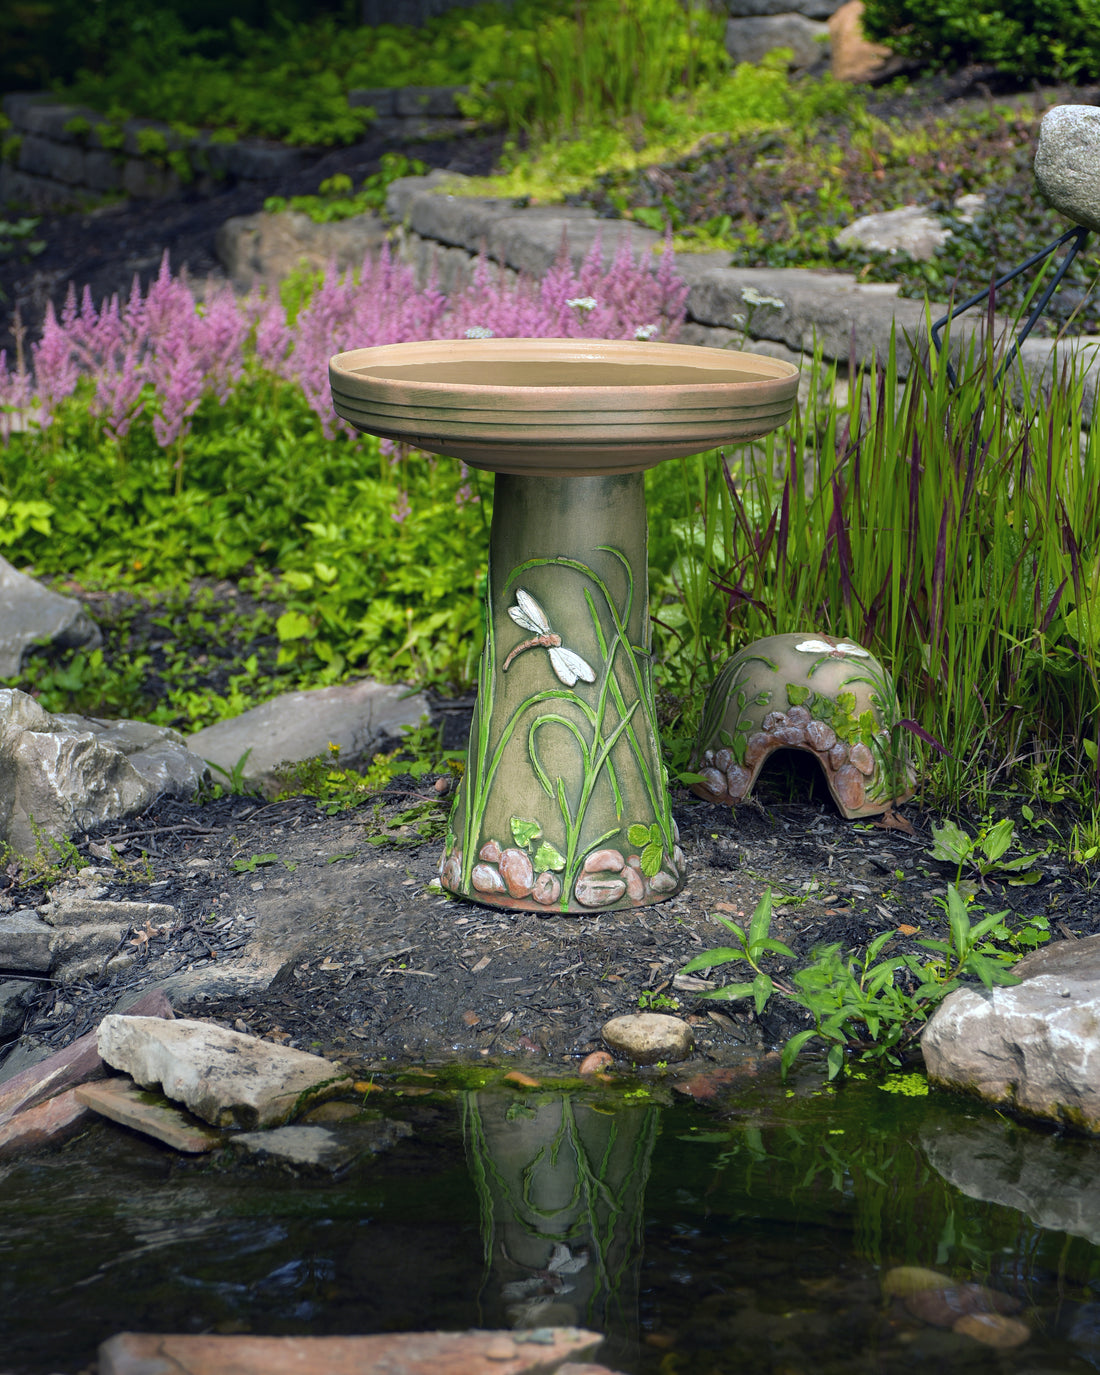 ceramic birdbath set with hand painted dragonfly and toad house in landscaped garden area